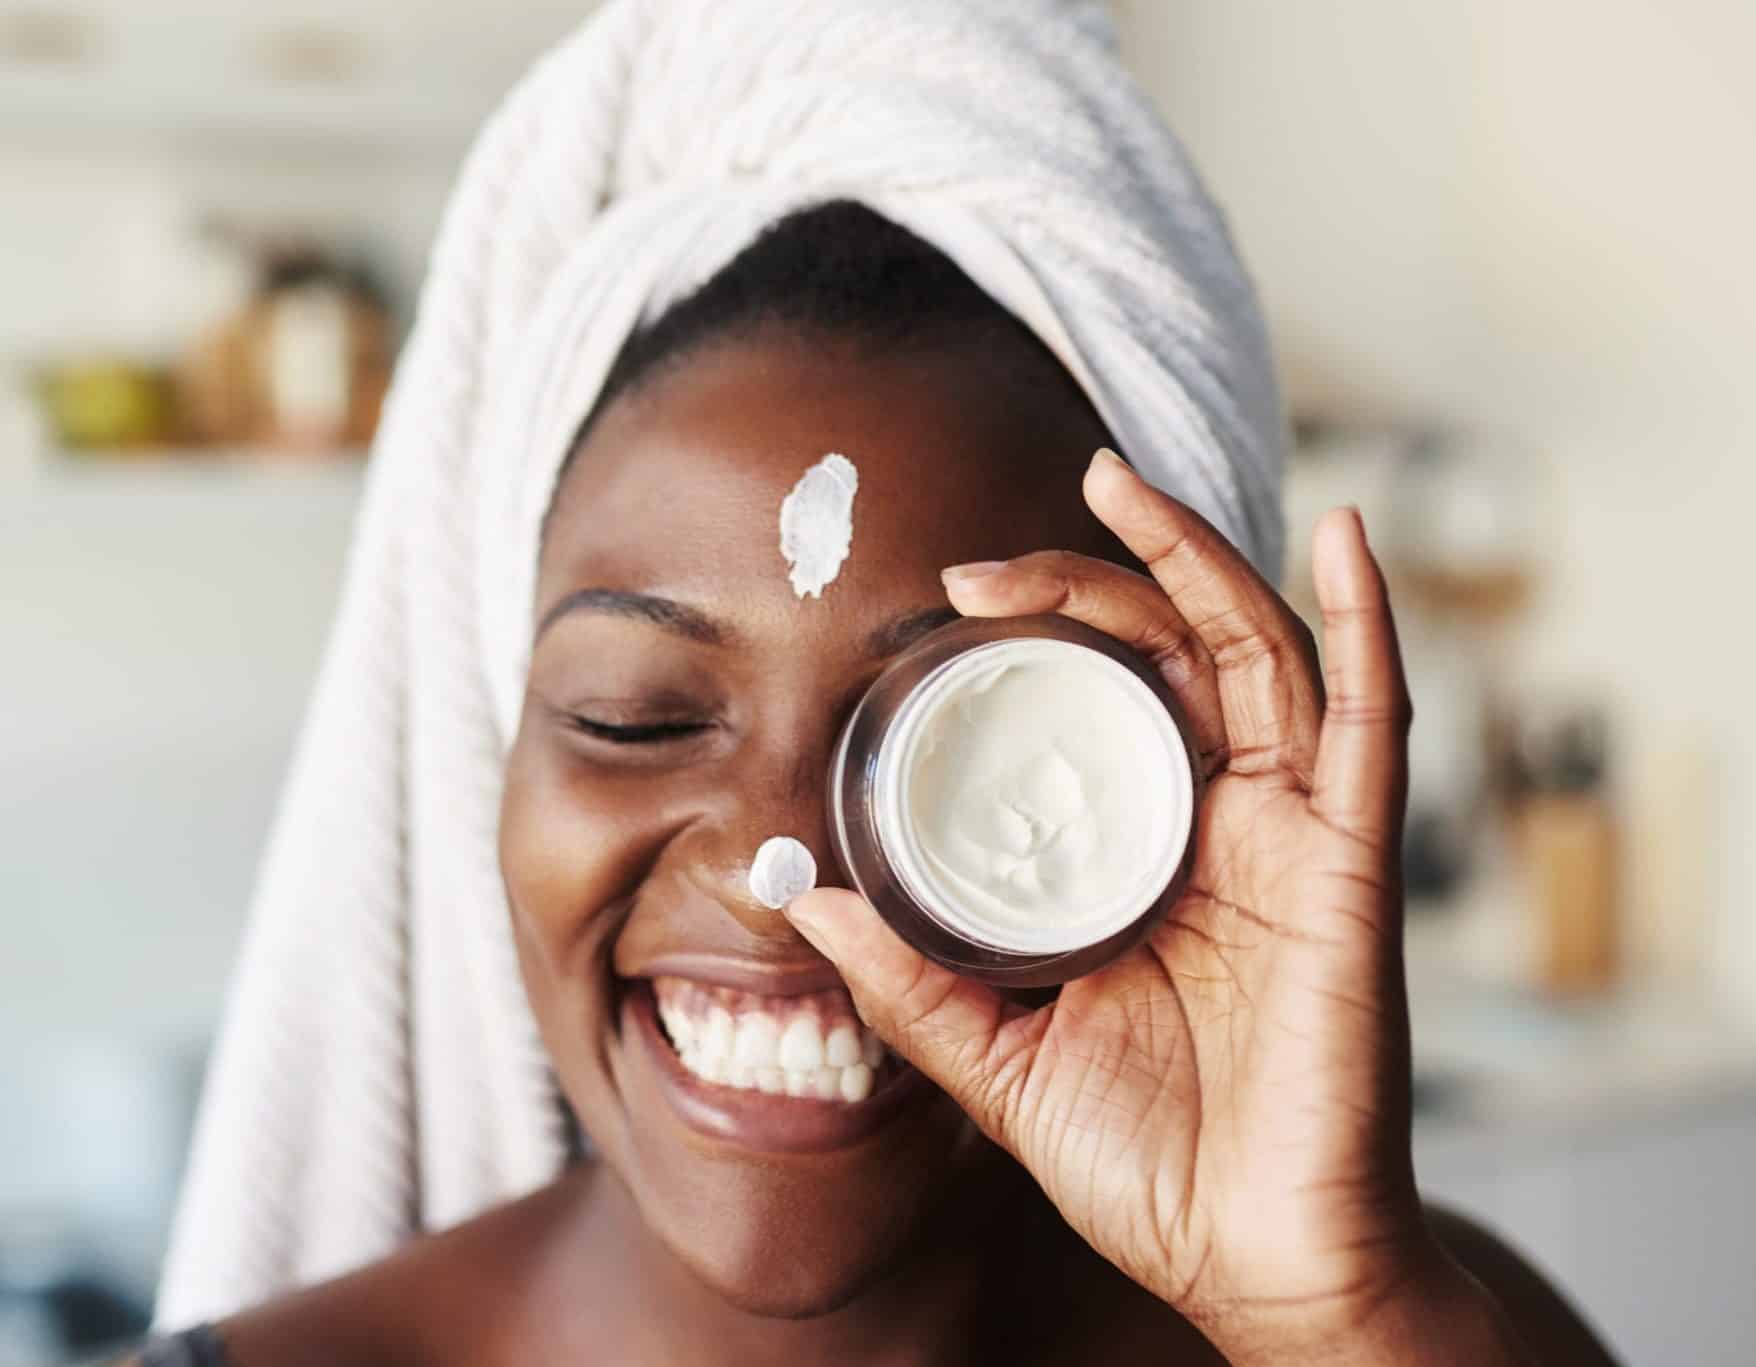 Shot of a beautiful young woman holding up a face cream product